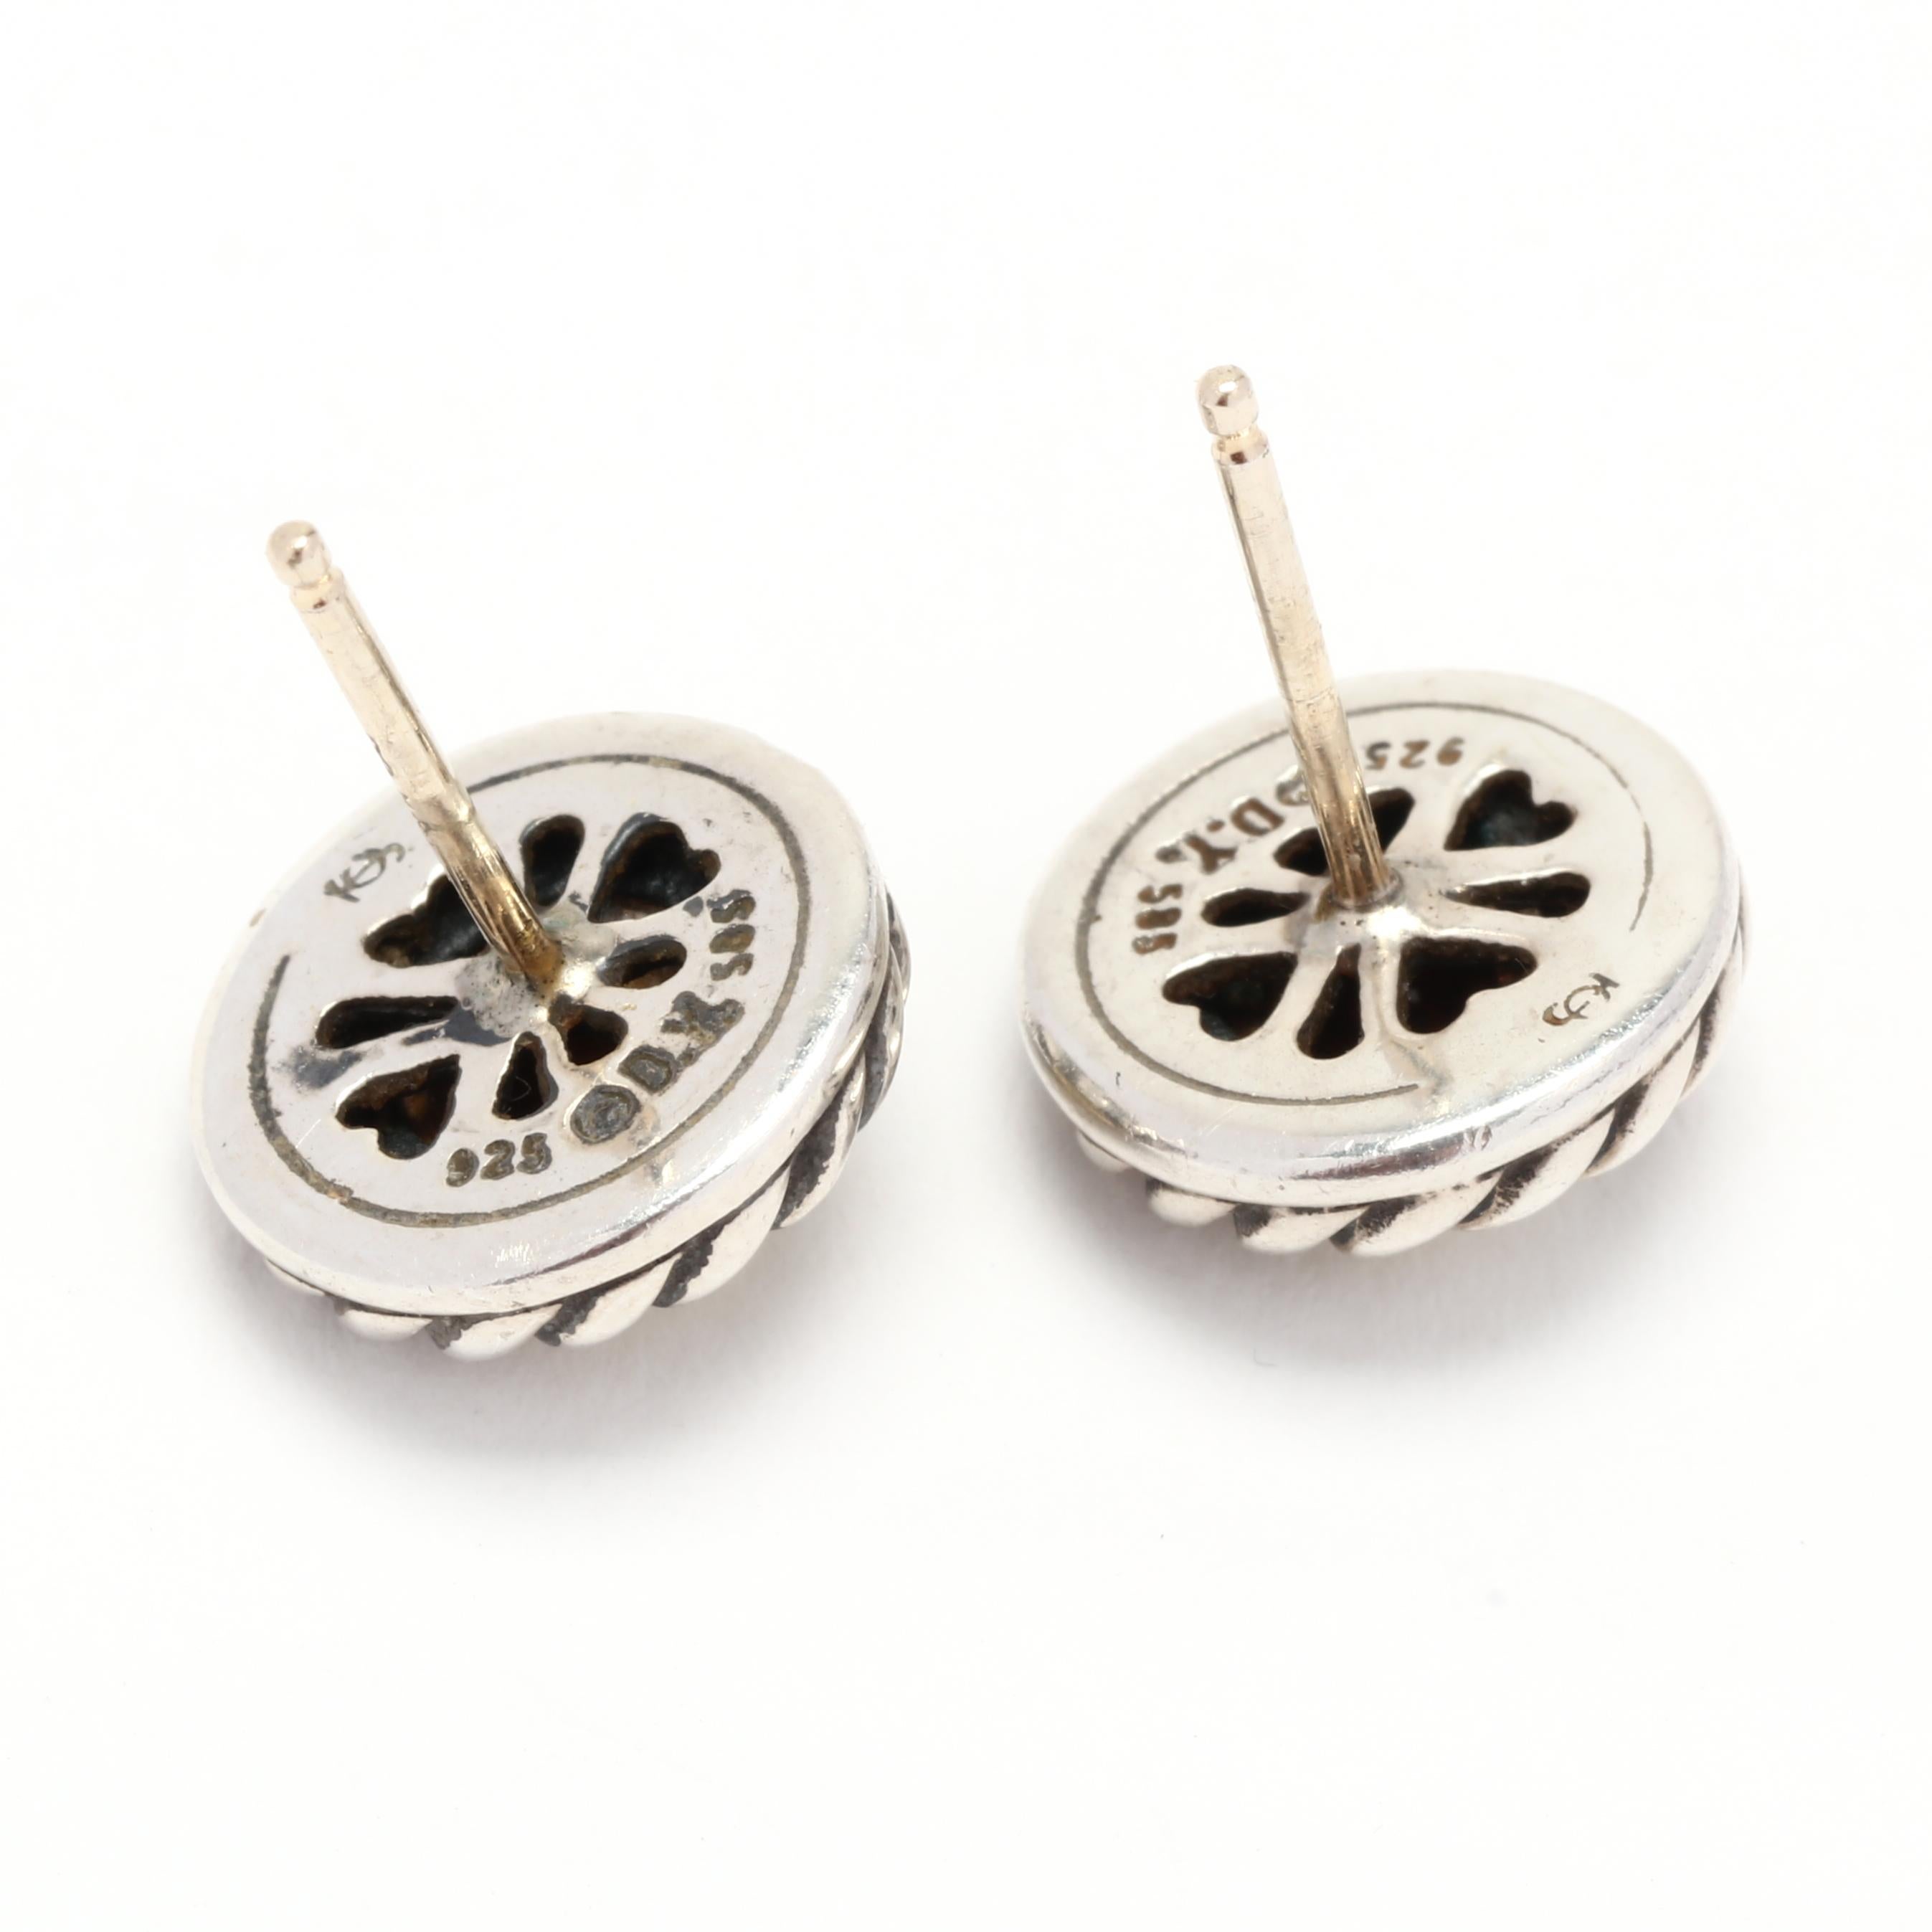 These David Yurman small cookie stud earrings are a chic and versatile accessory for any jewelry lover. Made from a combination of 14K yellow gold and sterling silver, these studs offer a beautiful contrast that adds visual interest to your look.